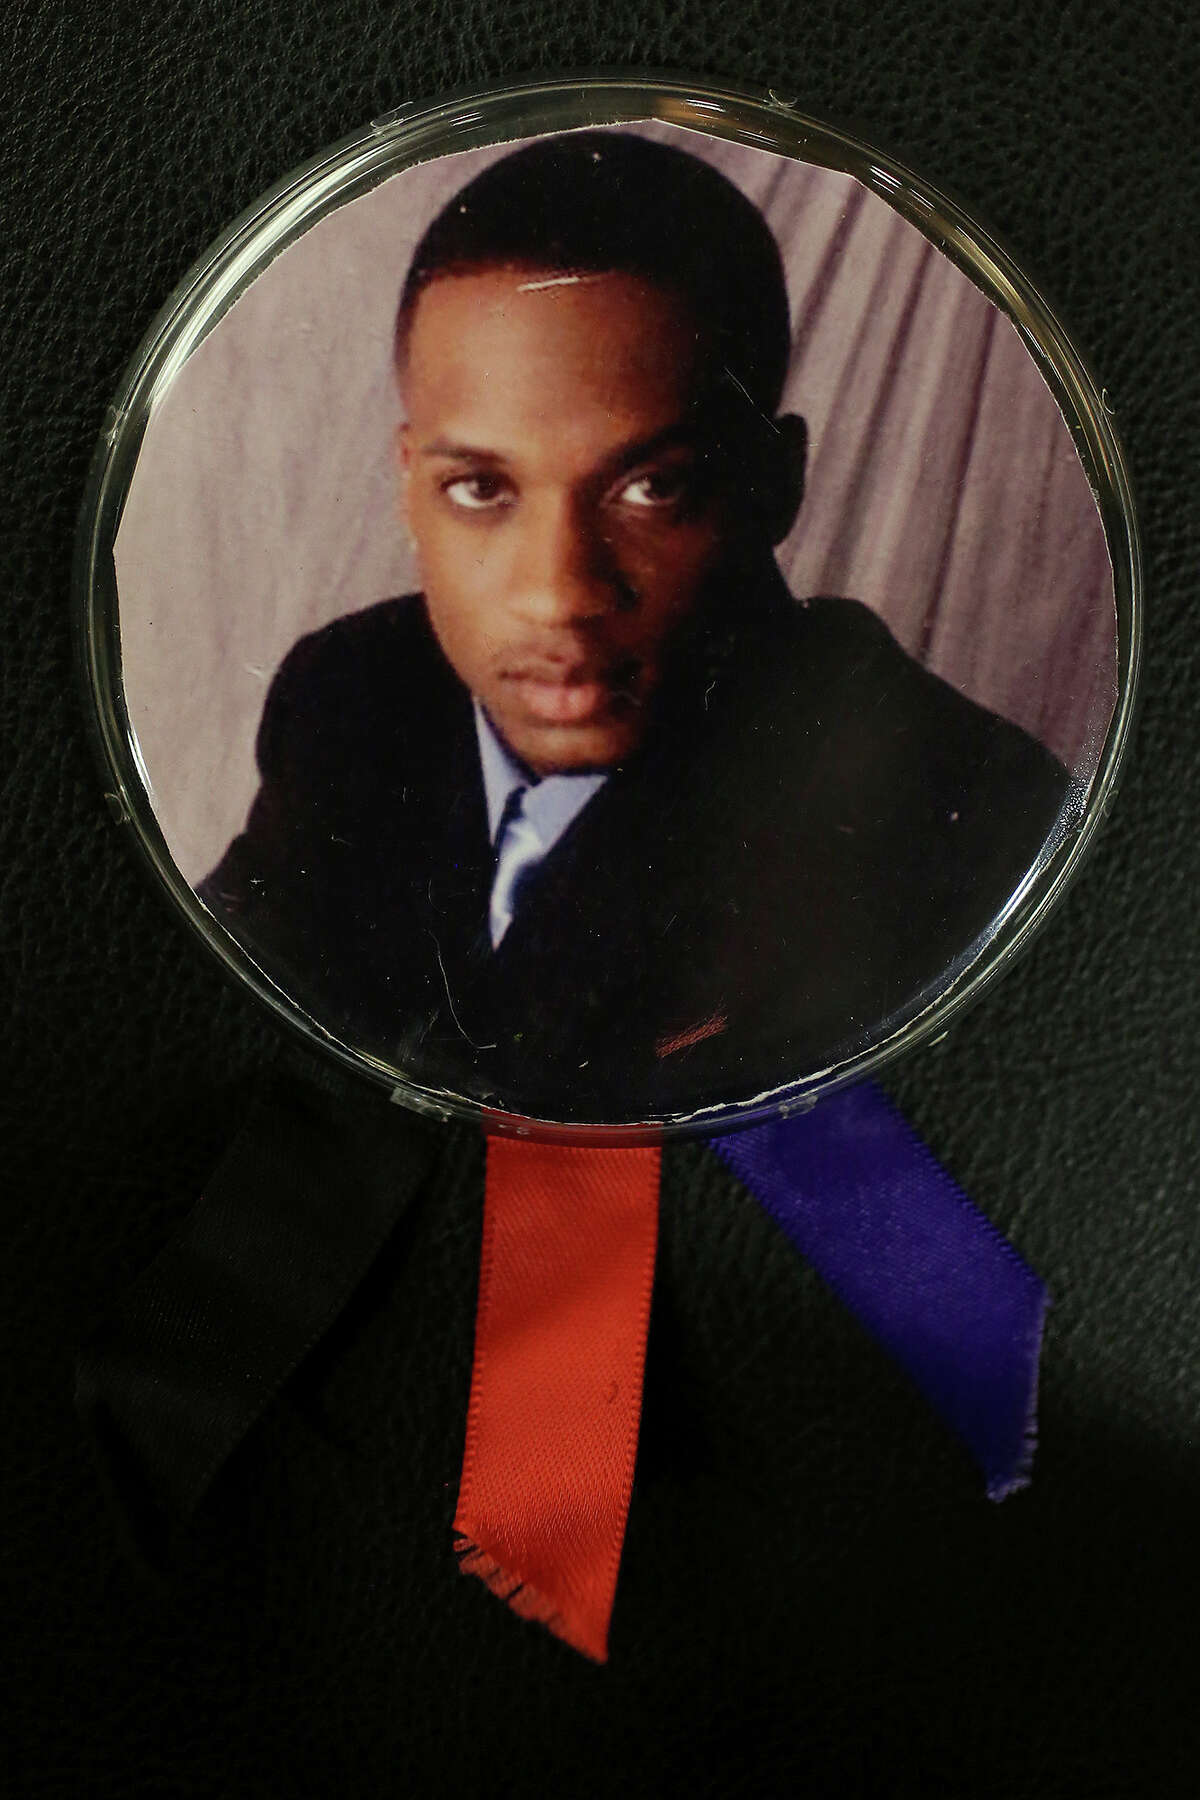 A button with a photograph of Samuel Johnson, Jr. carried by his mother, Stephanie Johnson, during the trial of Bernard "B.J." Brown, for the murder of her son in the 379th District Court in San Antonio on Tuesday, Oct. 8, 2013.